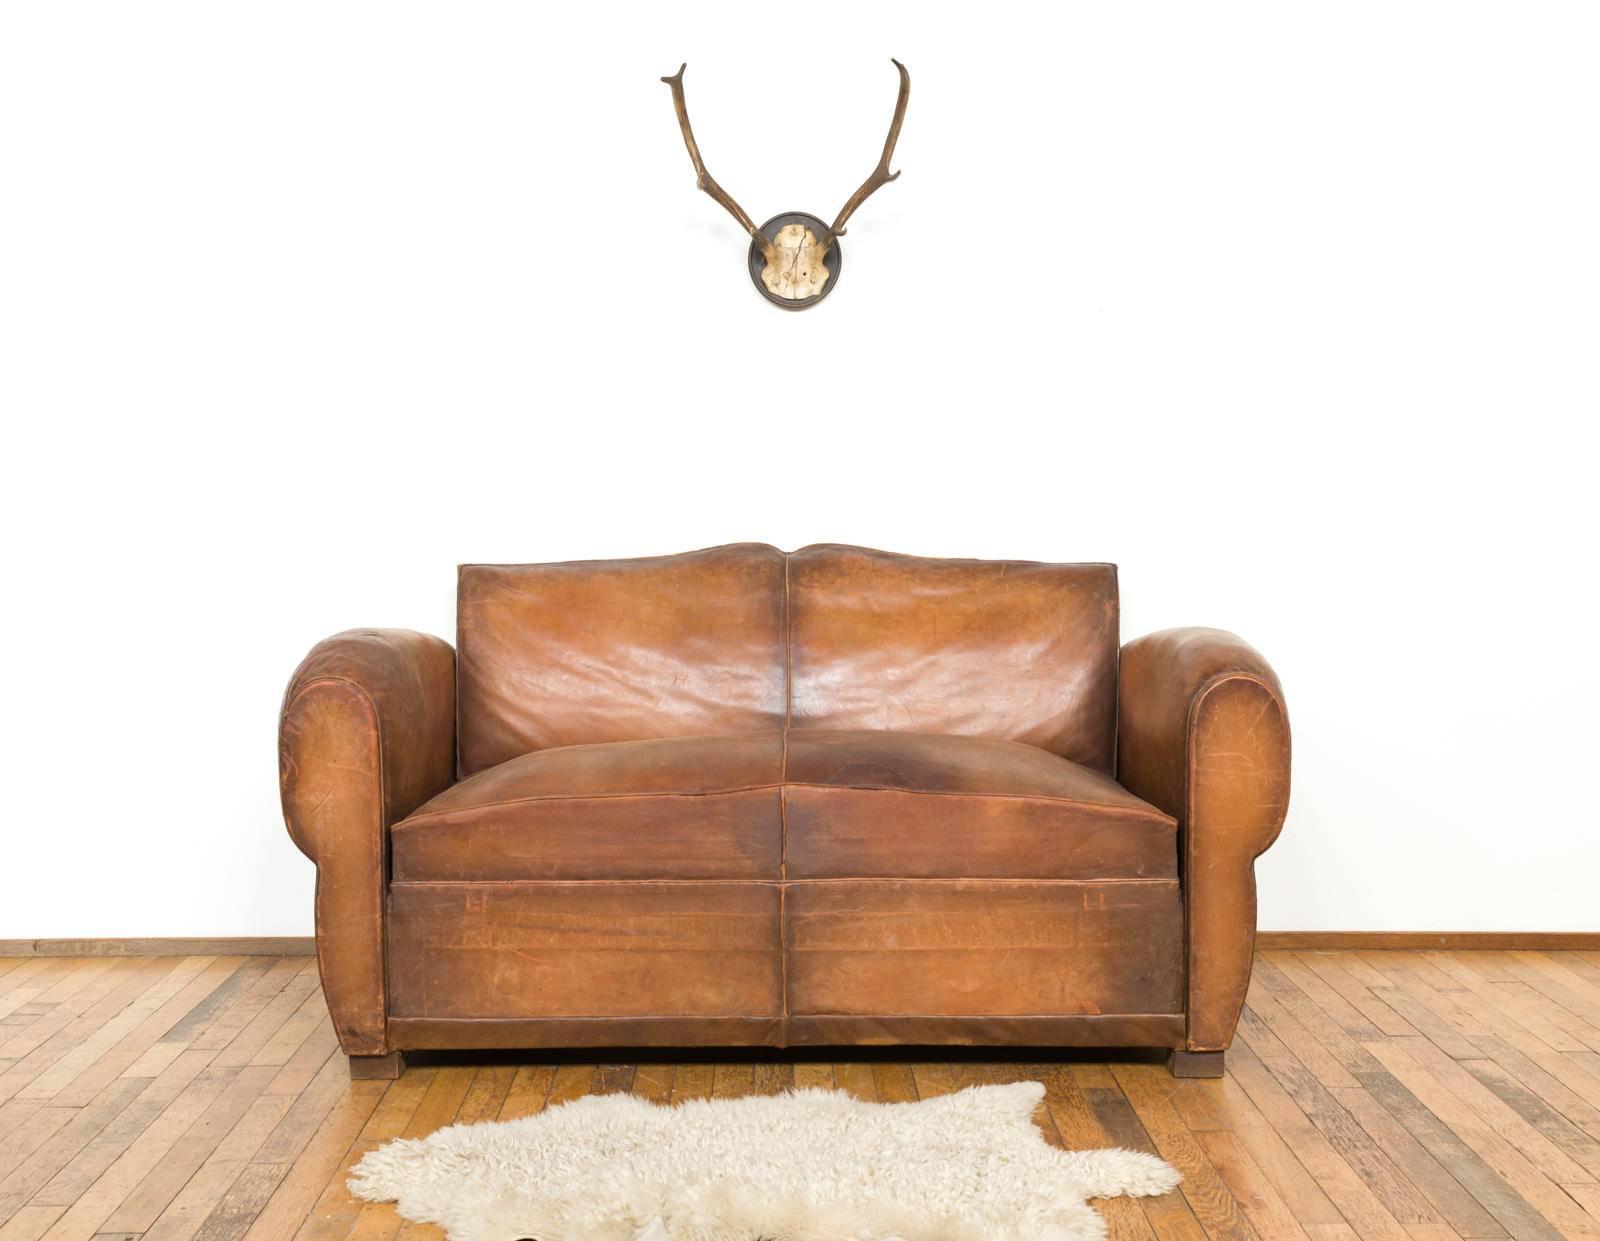 Beautiful French ‘Moustache’ clubsofa made in the 1930s-1940s. The sofa is made out of cognac leather. The leather is well worn en has a beautiful patina. There have been a couple of repairs to the leather which can be seen on the photos. 

The